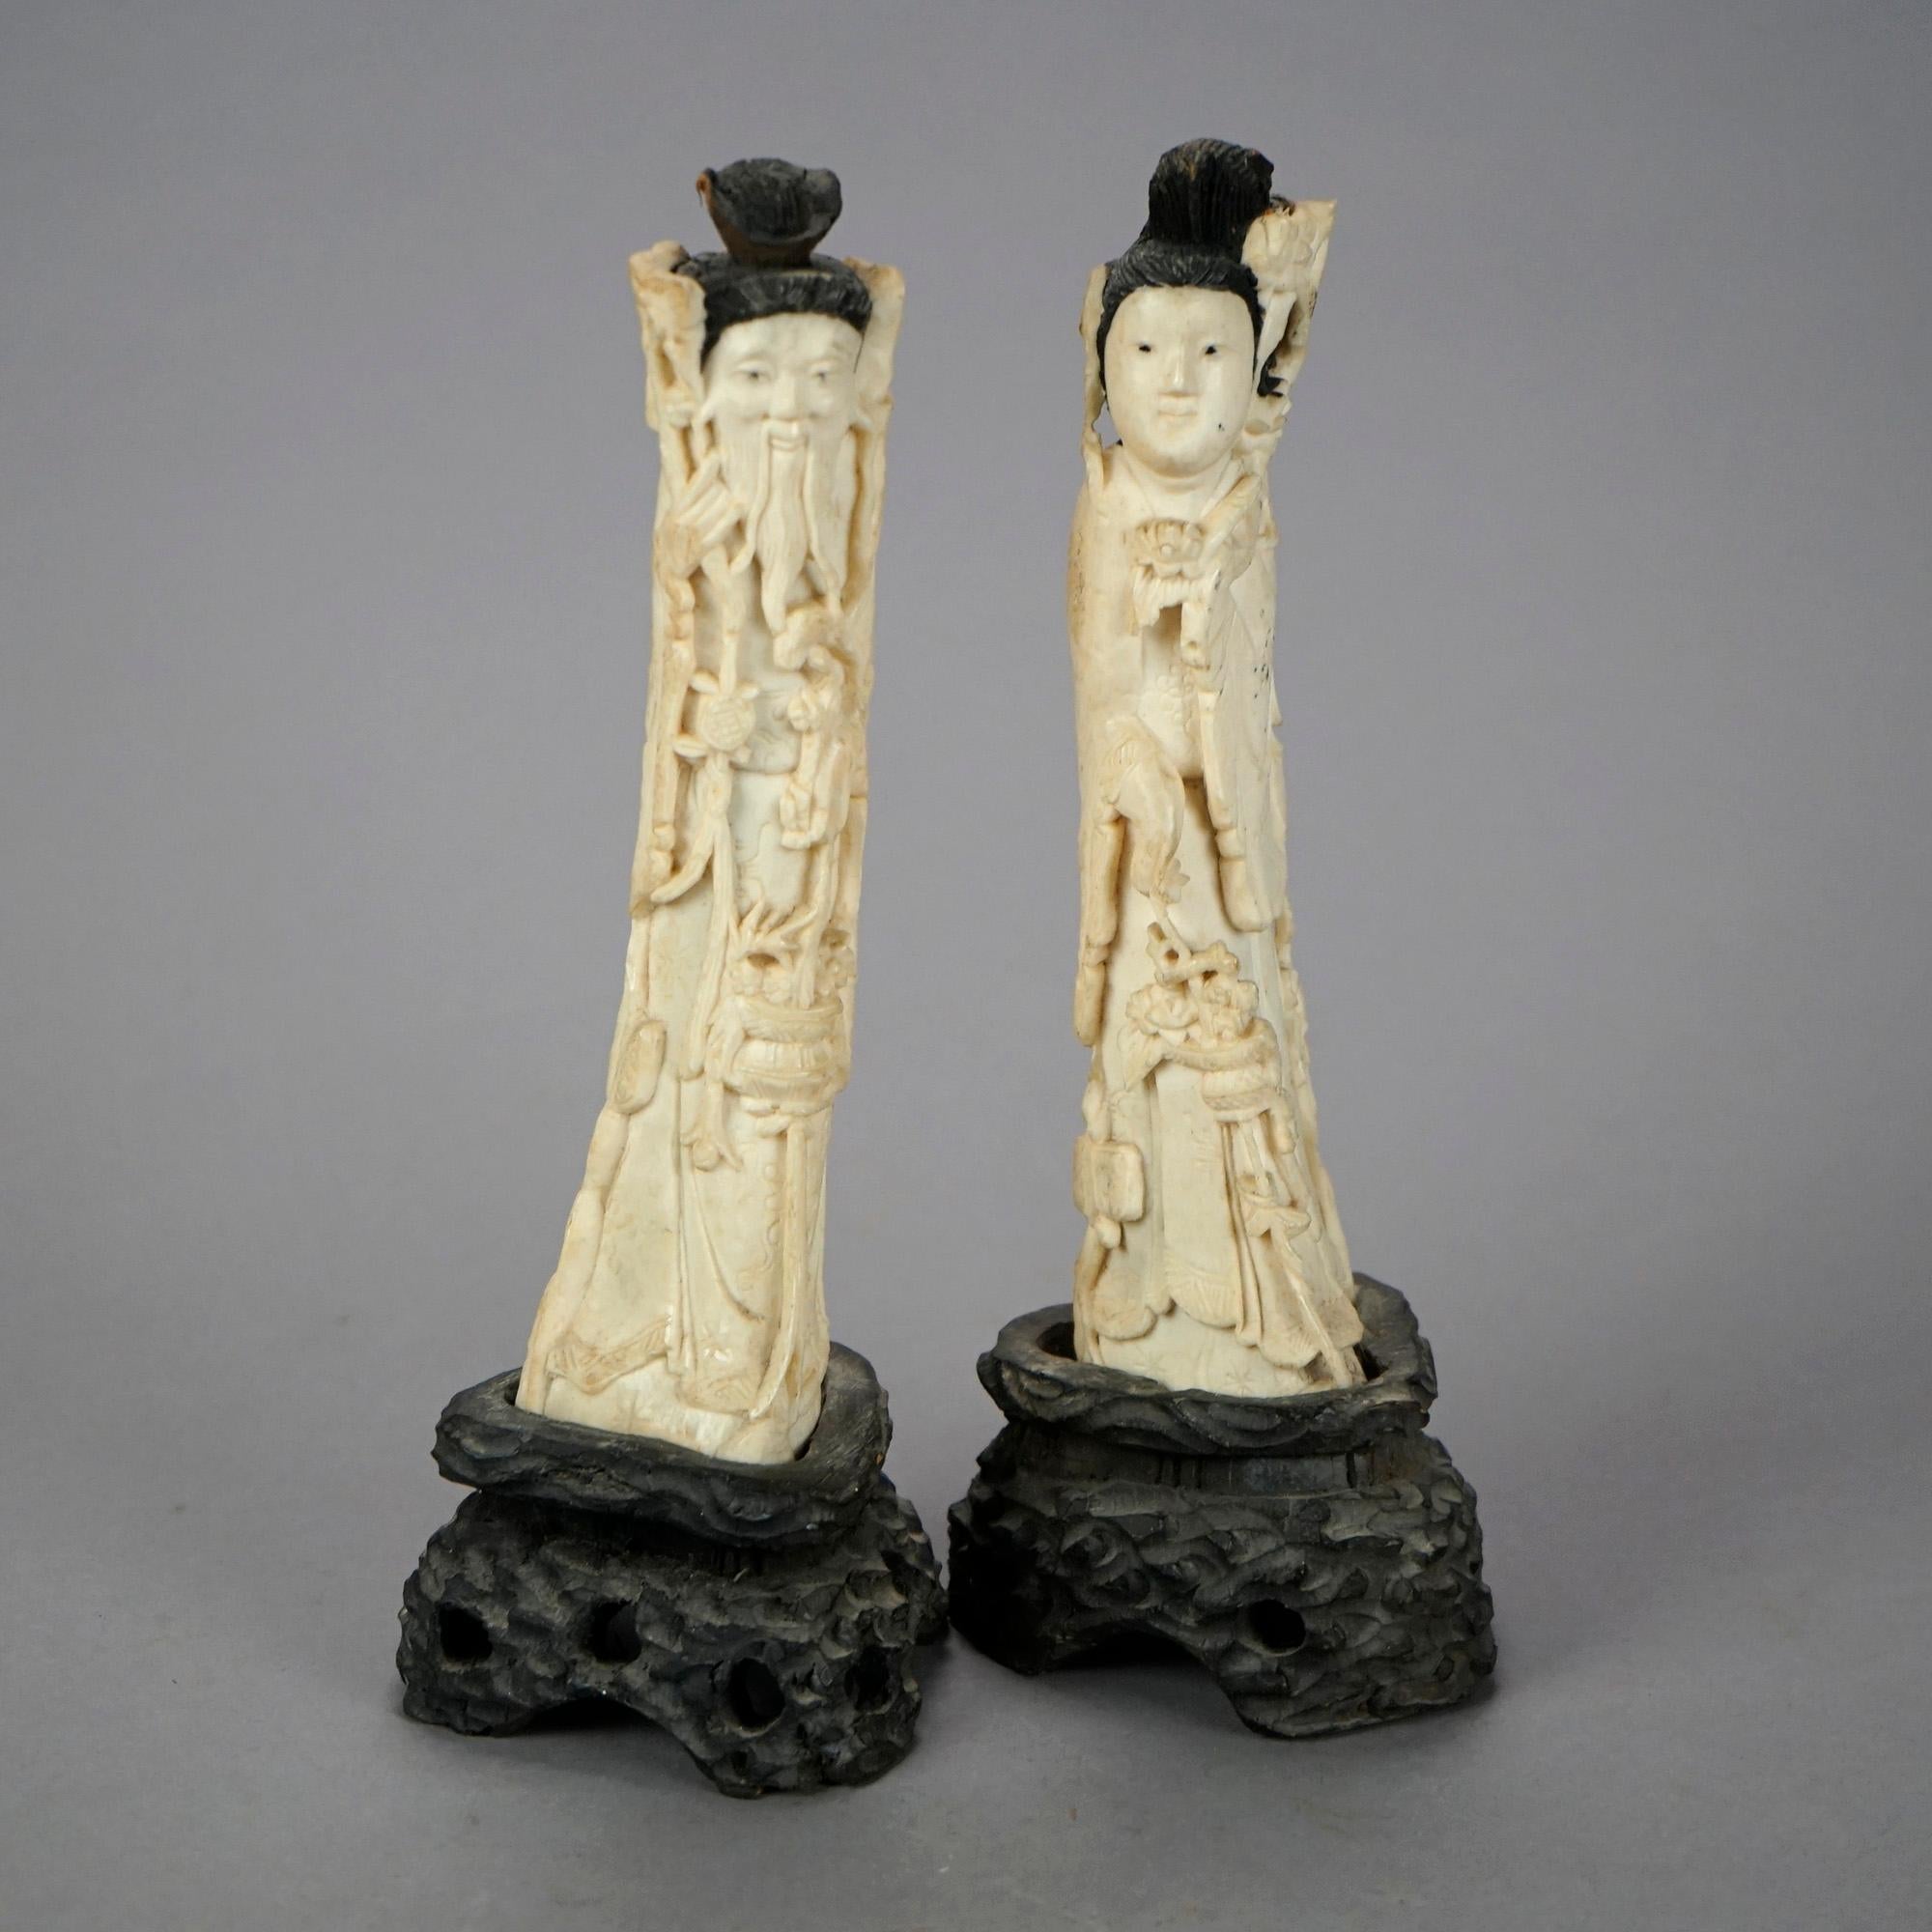 A pair of Chinese figures offer carved bone wise man and woman mounted on carved hardwood bases, 20th century

Measures- 9''H x 3.25''W x 3.25''D